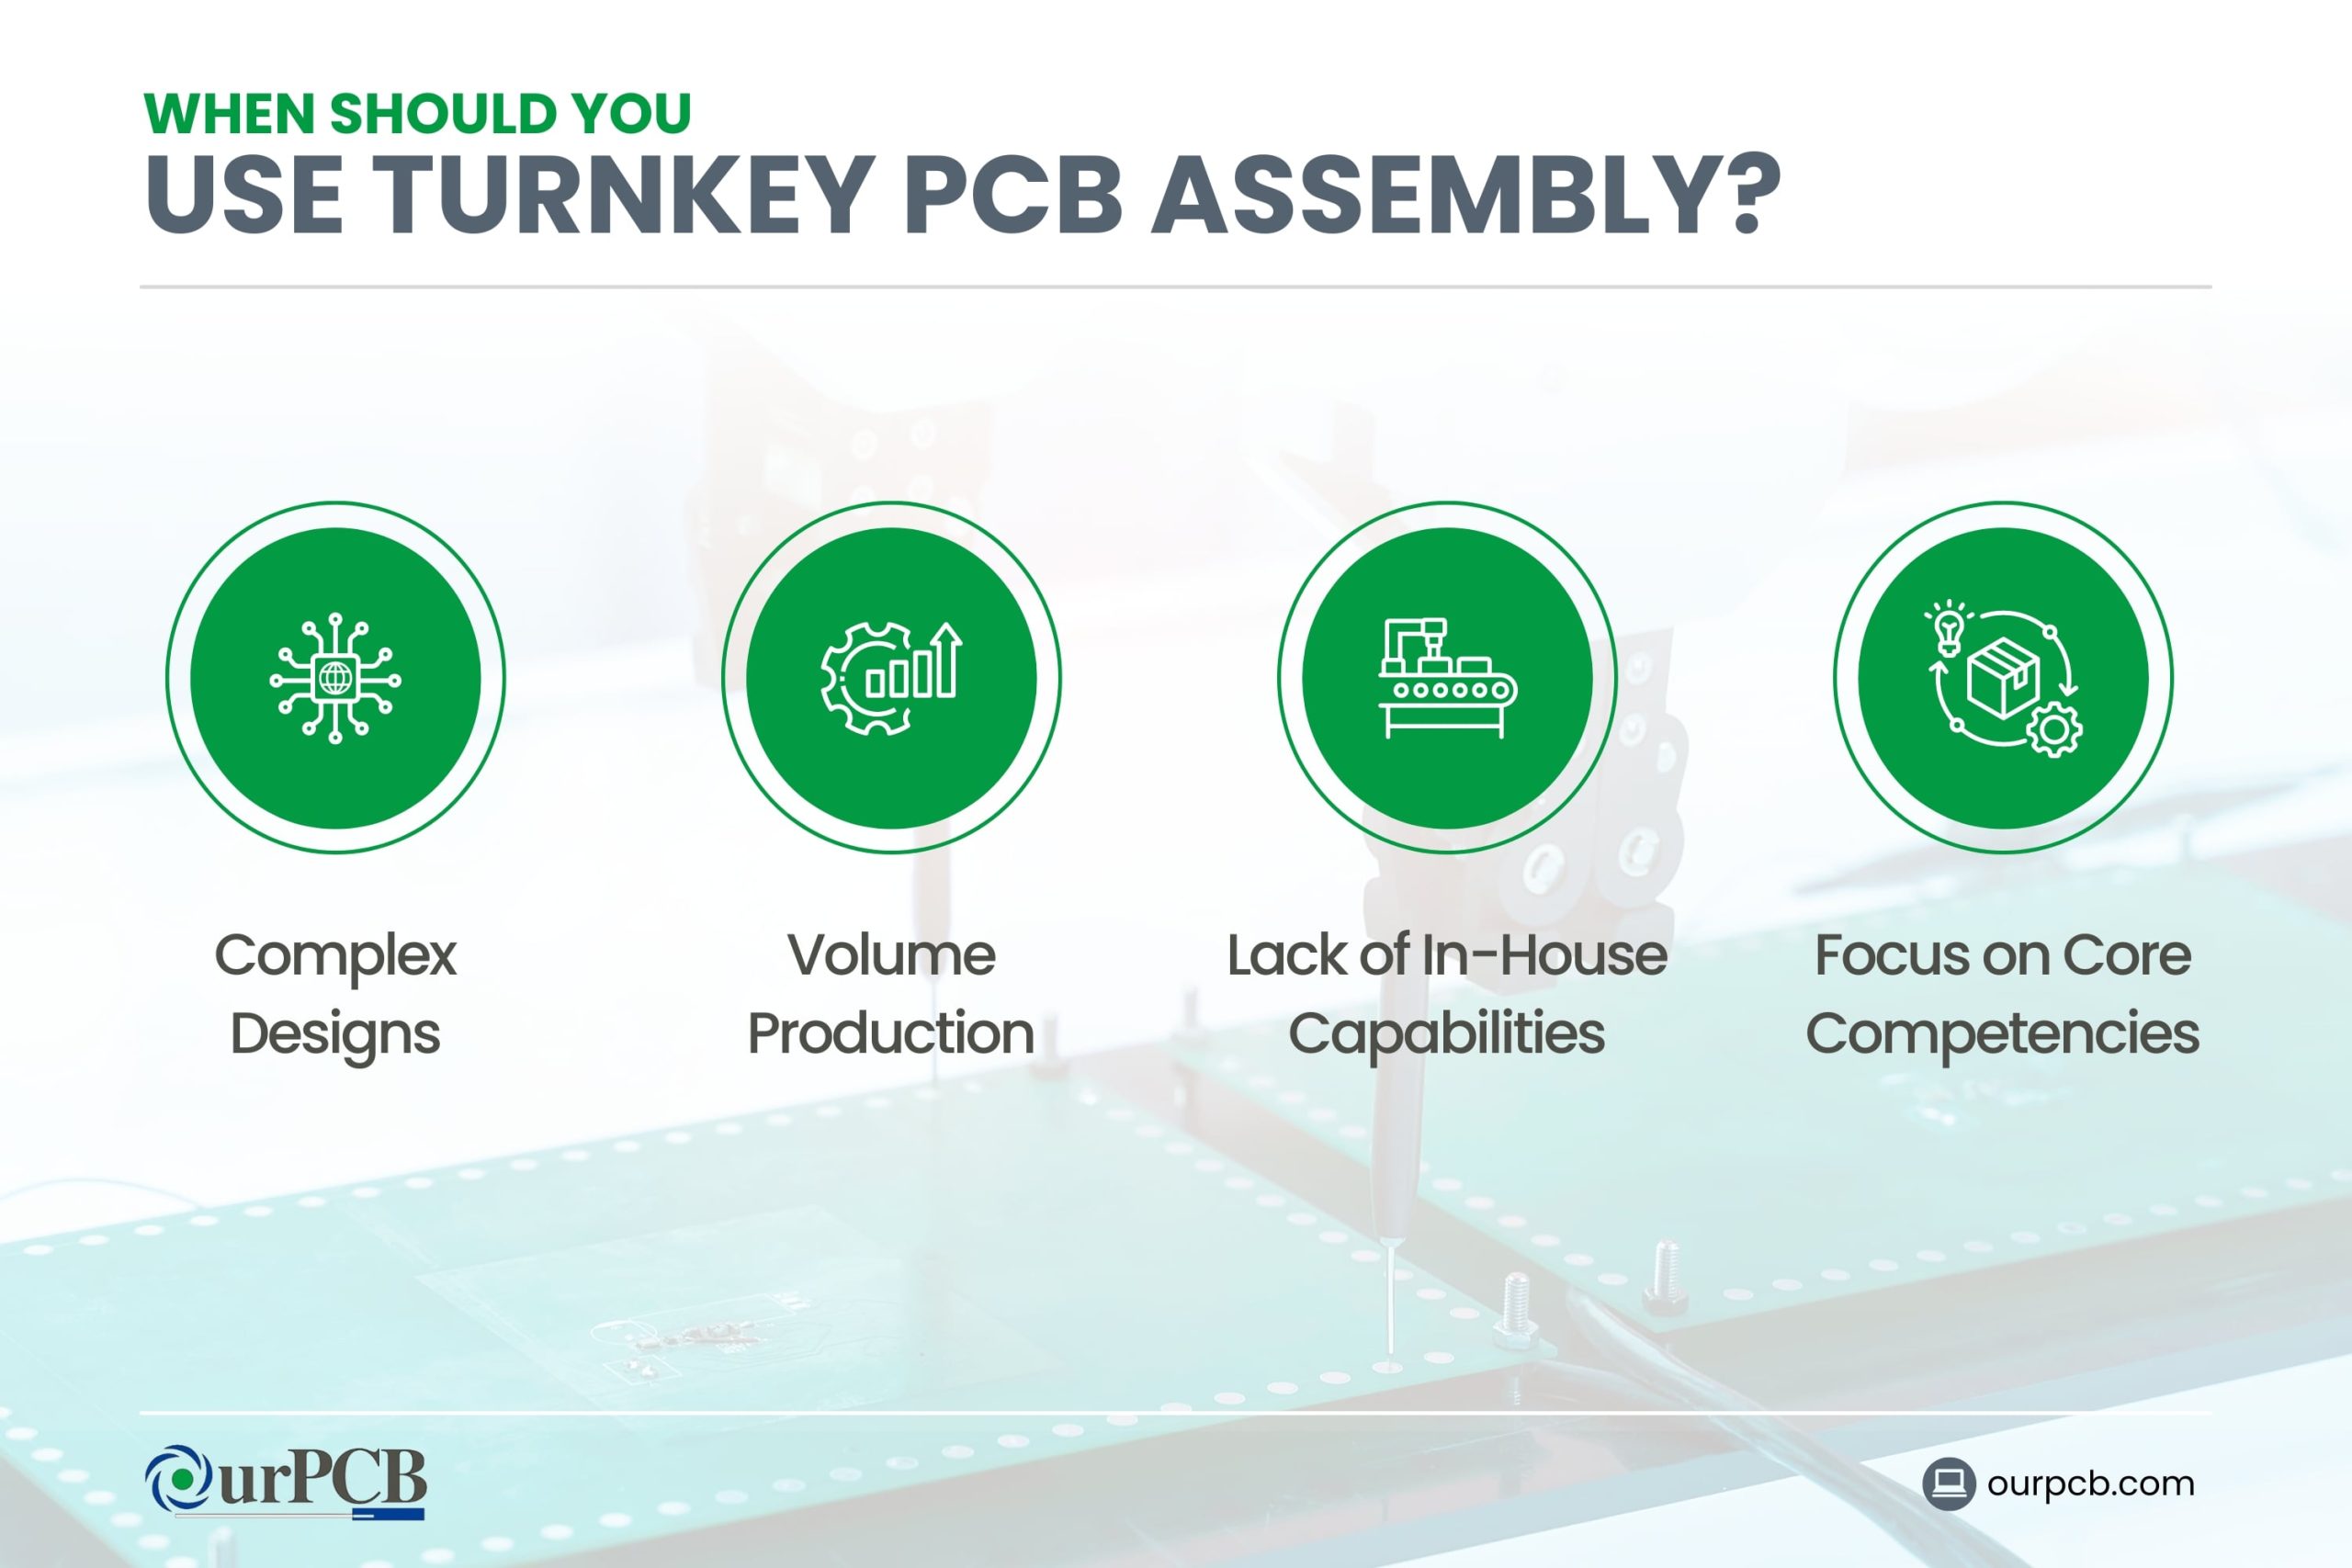 When Should You Use Turnkey PCB Assembly?